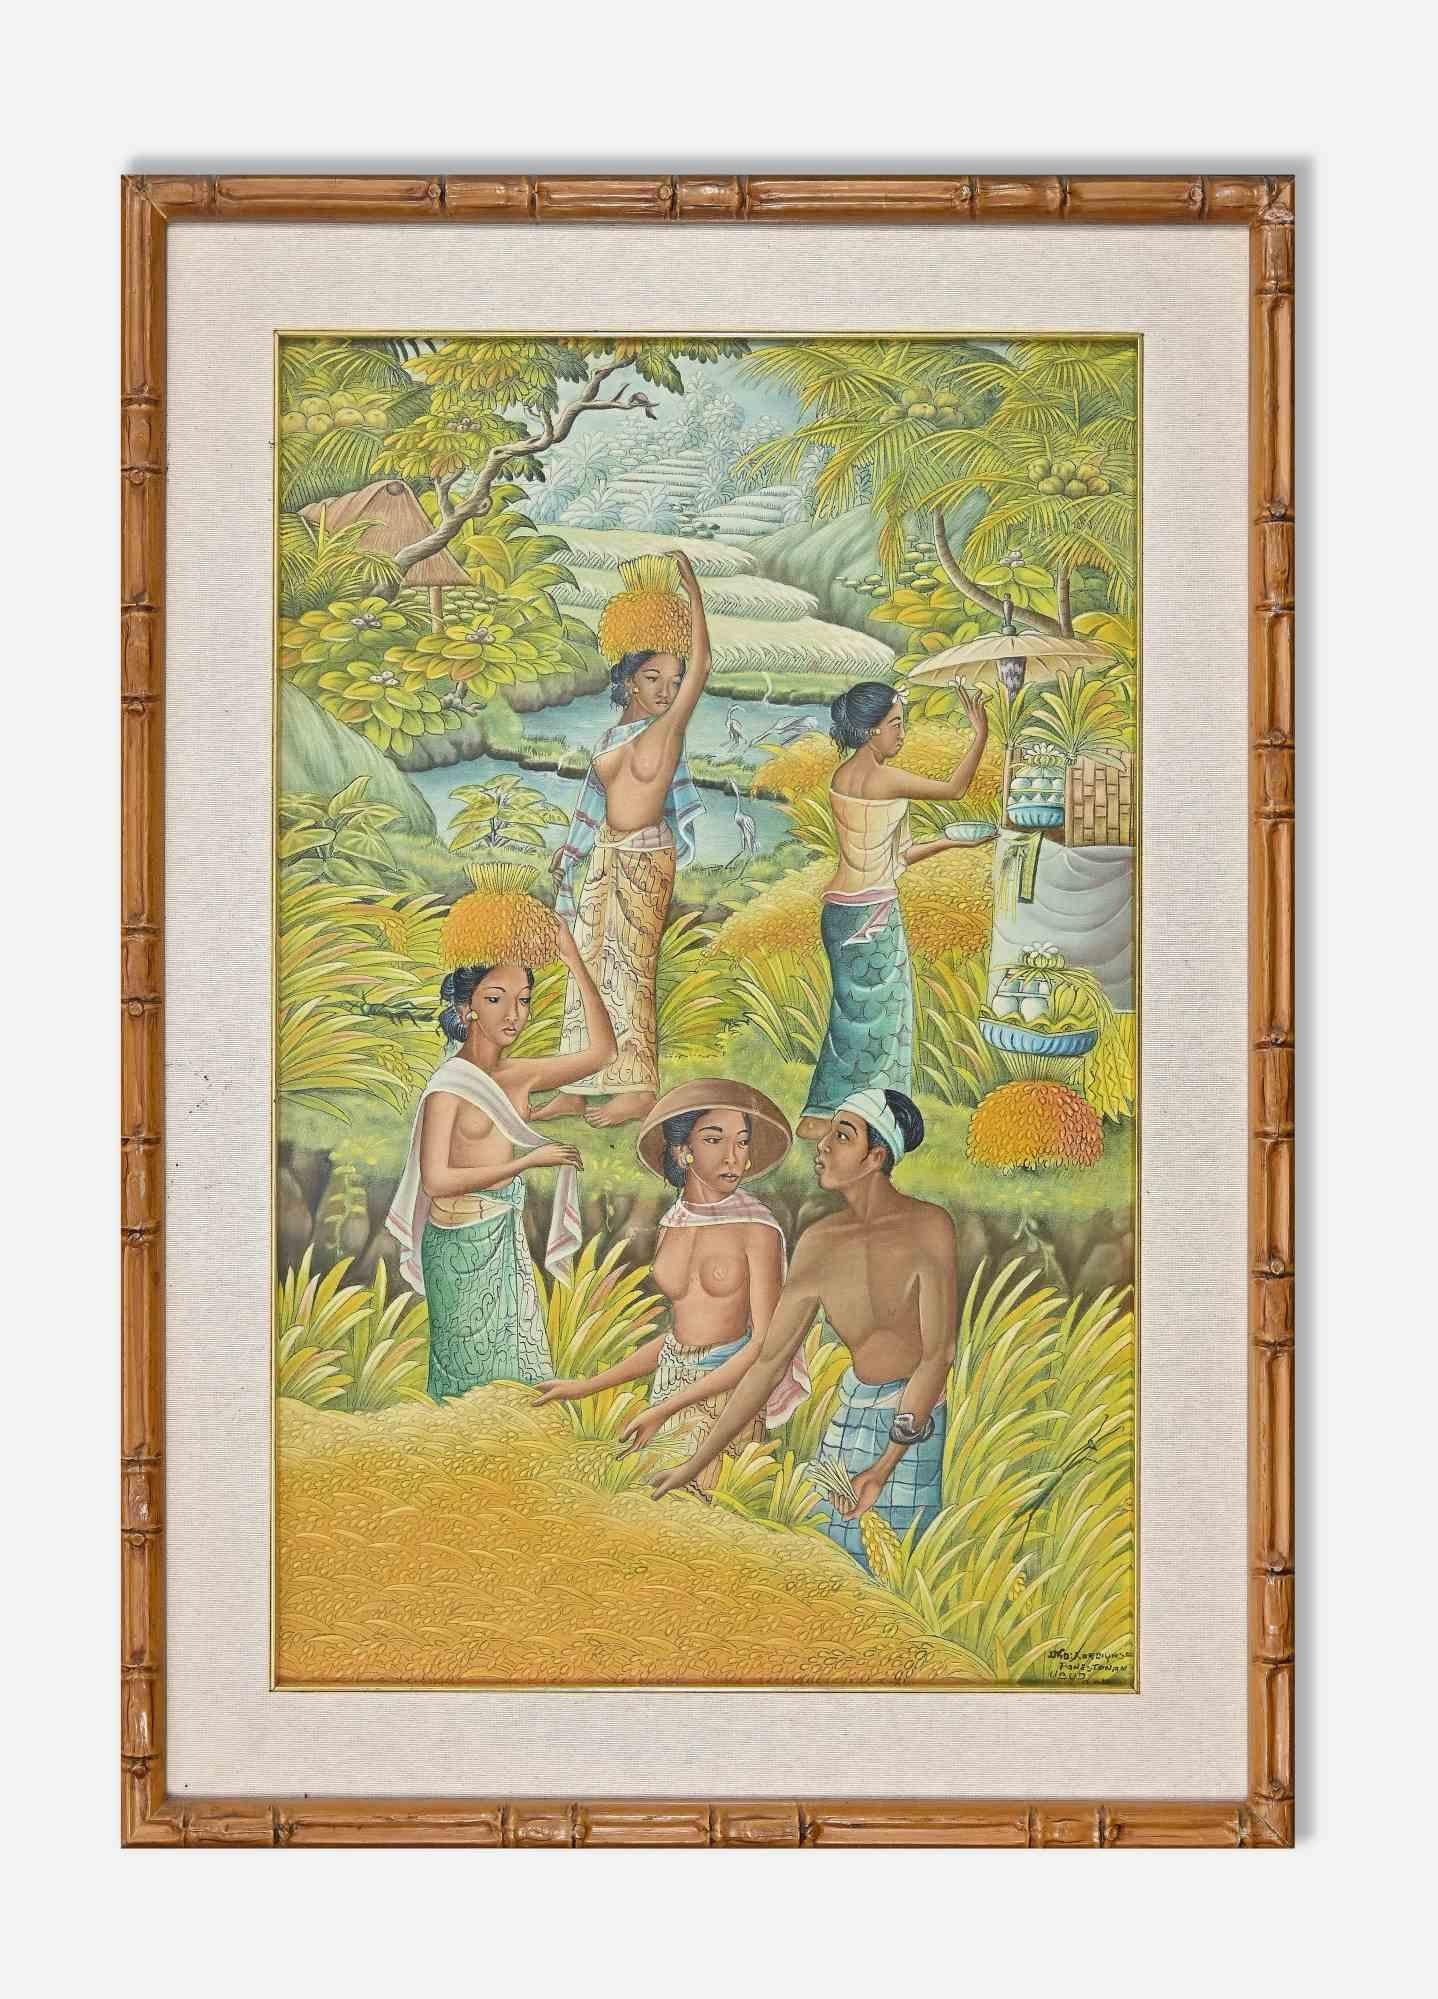 Balinese Scene - Tempera and Watercolor - Mid-20th Century